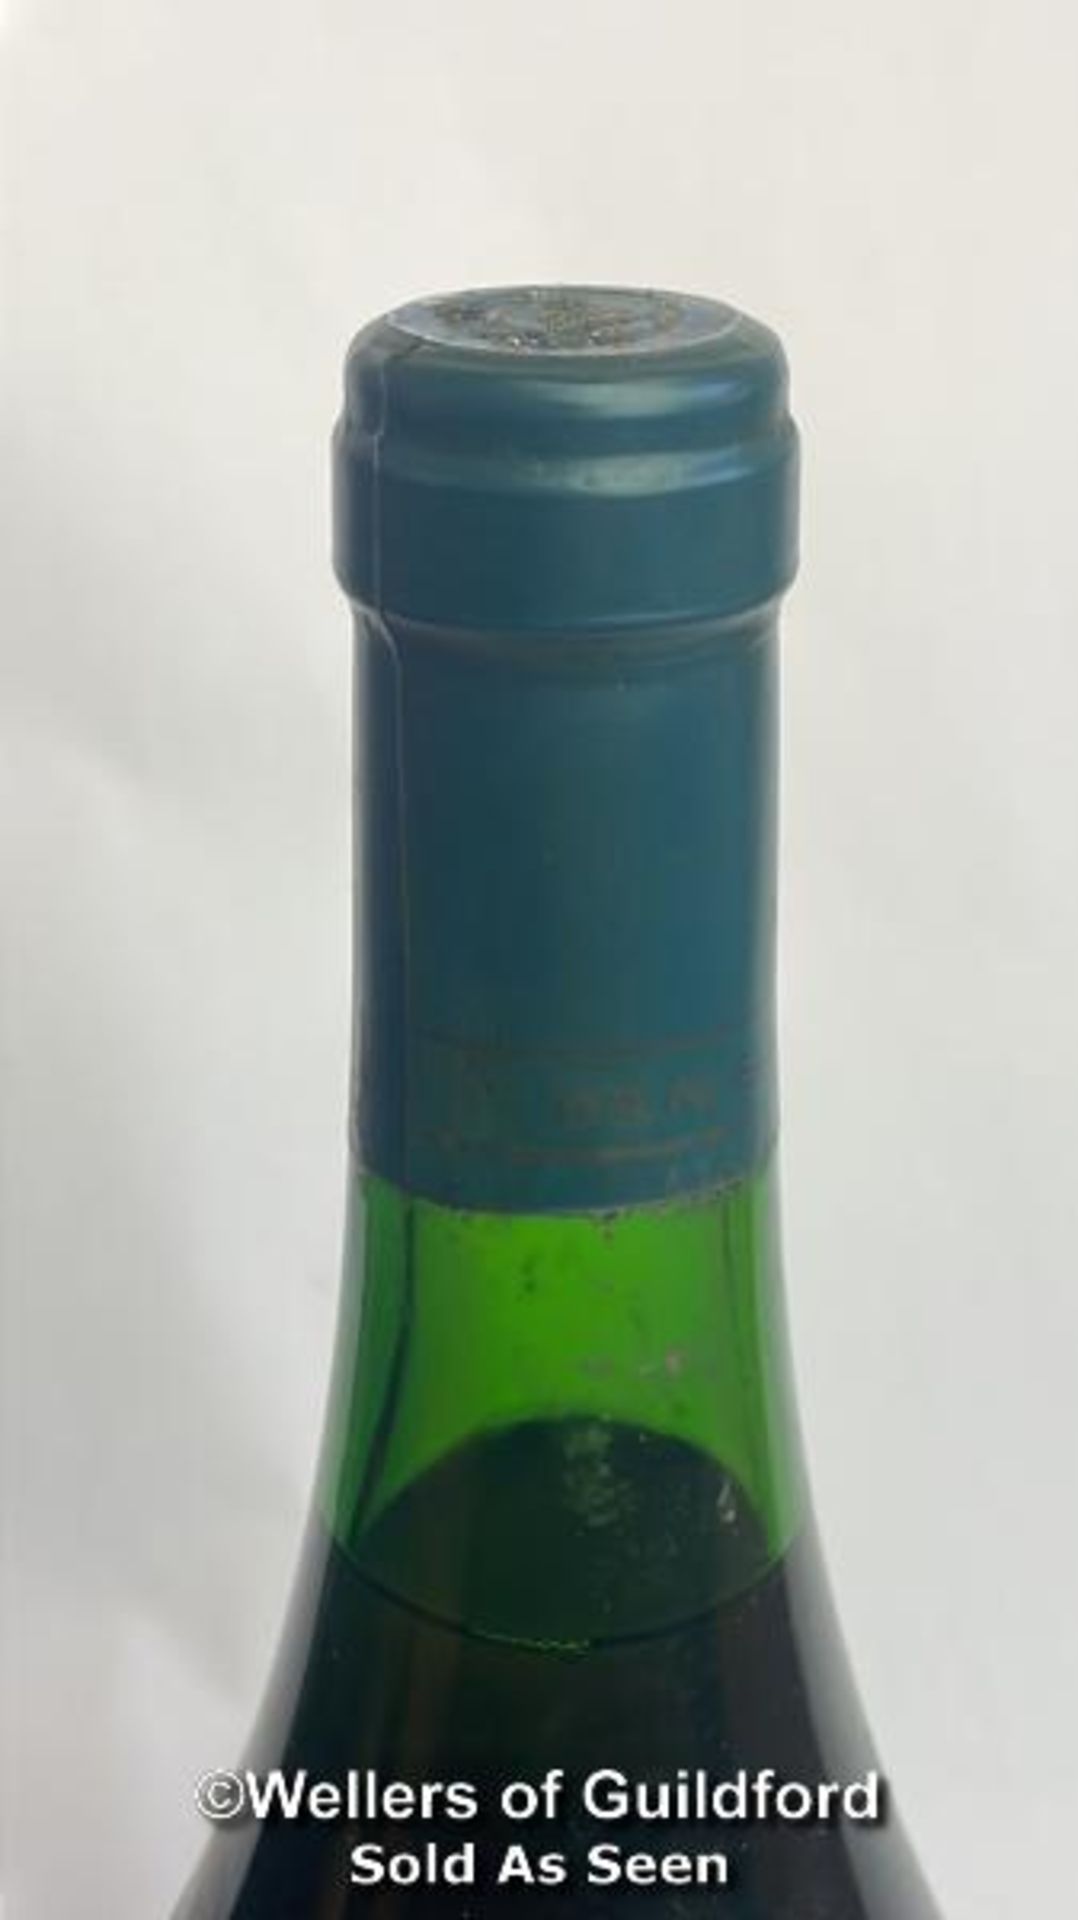 1992 Denbies Pino Gris, 75cl, 10.5% vol / Please see images for fill level and general condition. - Bild 5 aus 5